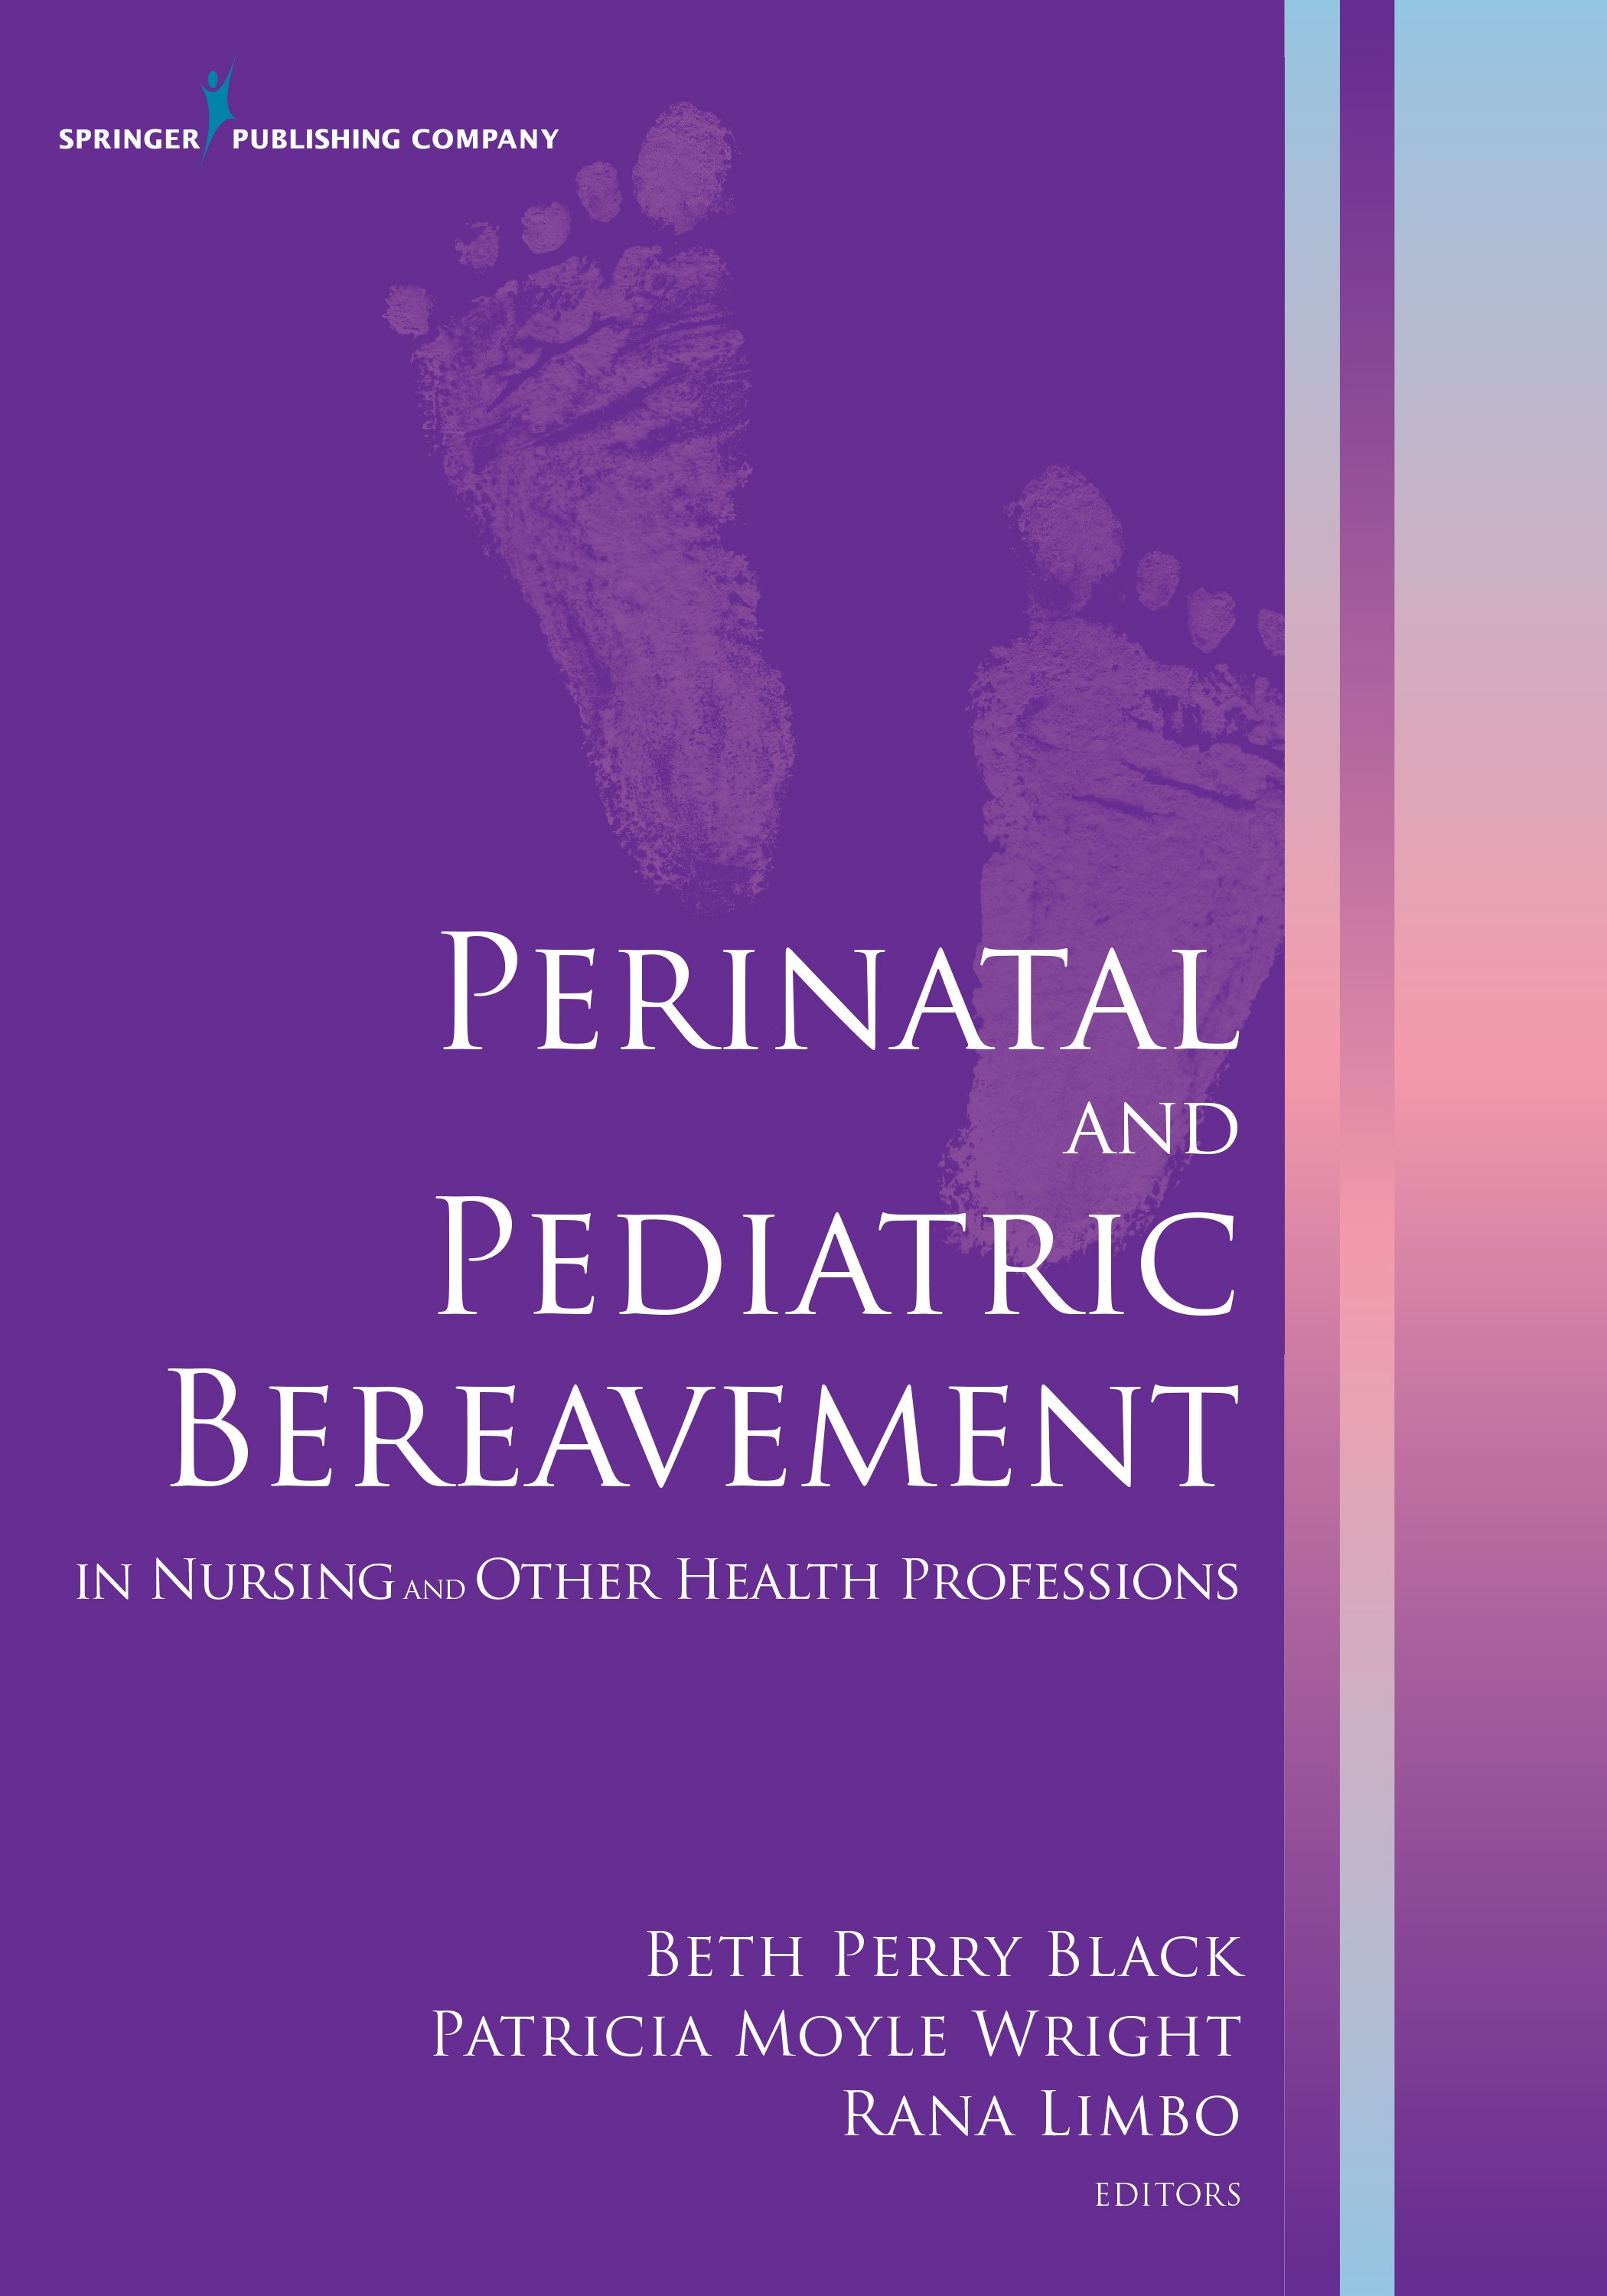 The book “Perinatal and Pediatric Bereavement in Nursing and Other Health Professions,” co-edited by University of Scranton Nursing Professor Patricia Moyle Wright, Ph.D., won first place in the Palliative Care and Hospice category of the 2016 American Journal of Nursing Book of the Year Awards.